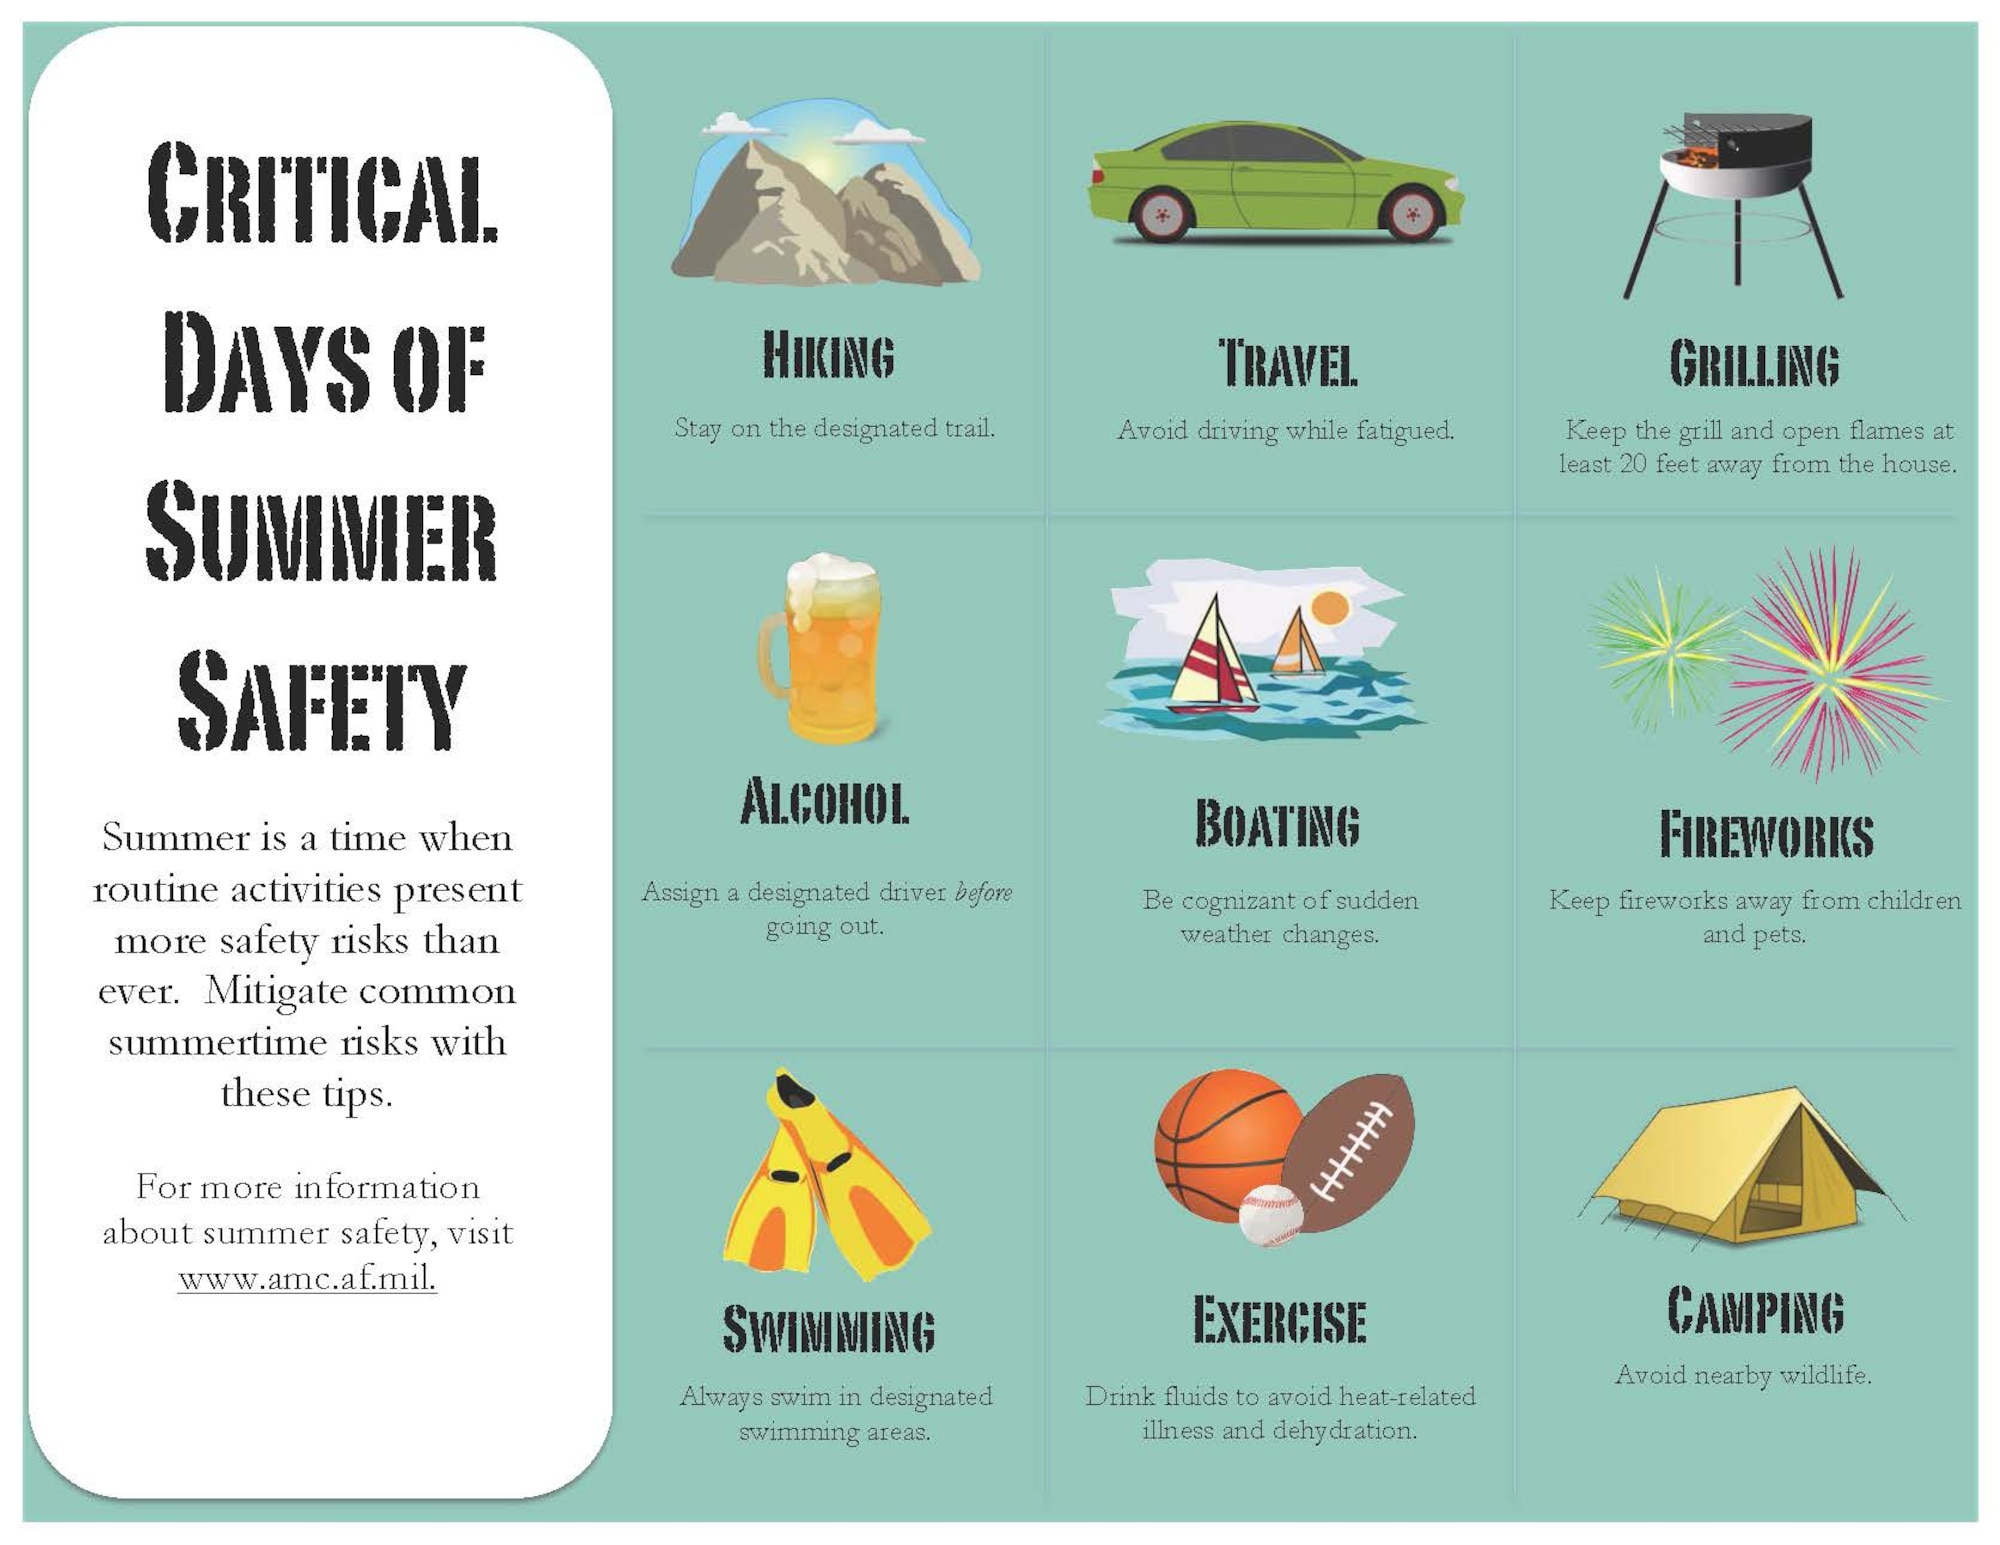 MacDill Air Force Base, Florida is observing the Critical Days of Summer Safety Campaign. The campaign is used to raise awareness about the risks involved with common summertime activities. Mitigate common summertime risks with these tips.